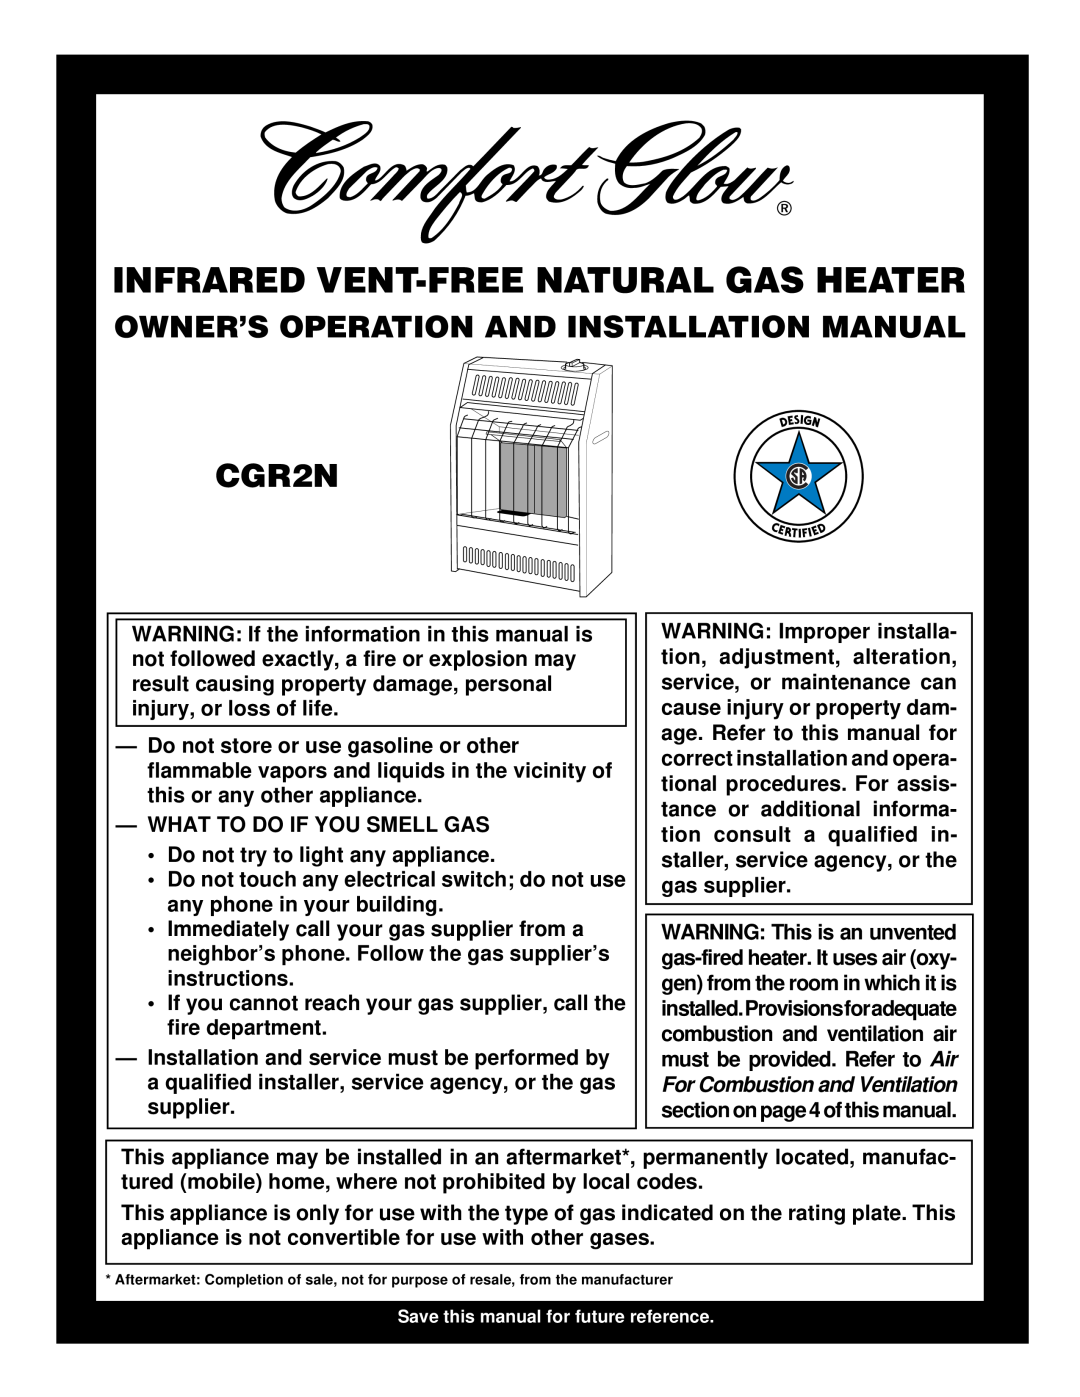 Desa CGR2N installation manual Infrared Vent-Free Natural Gas Heater, Owner’S Operation And Installation Manual 